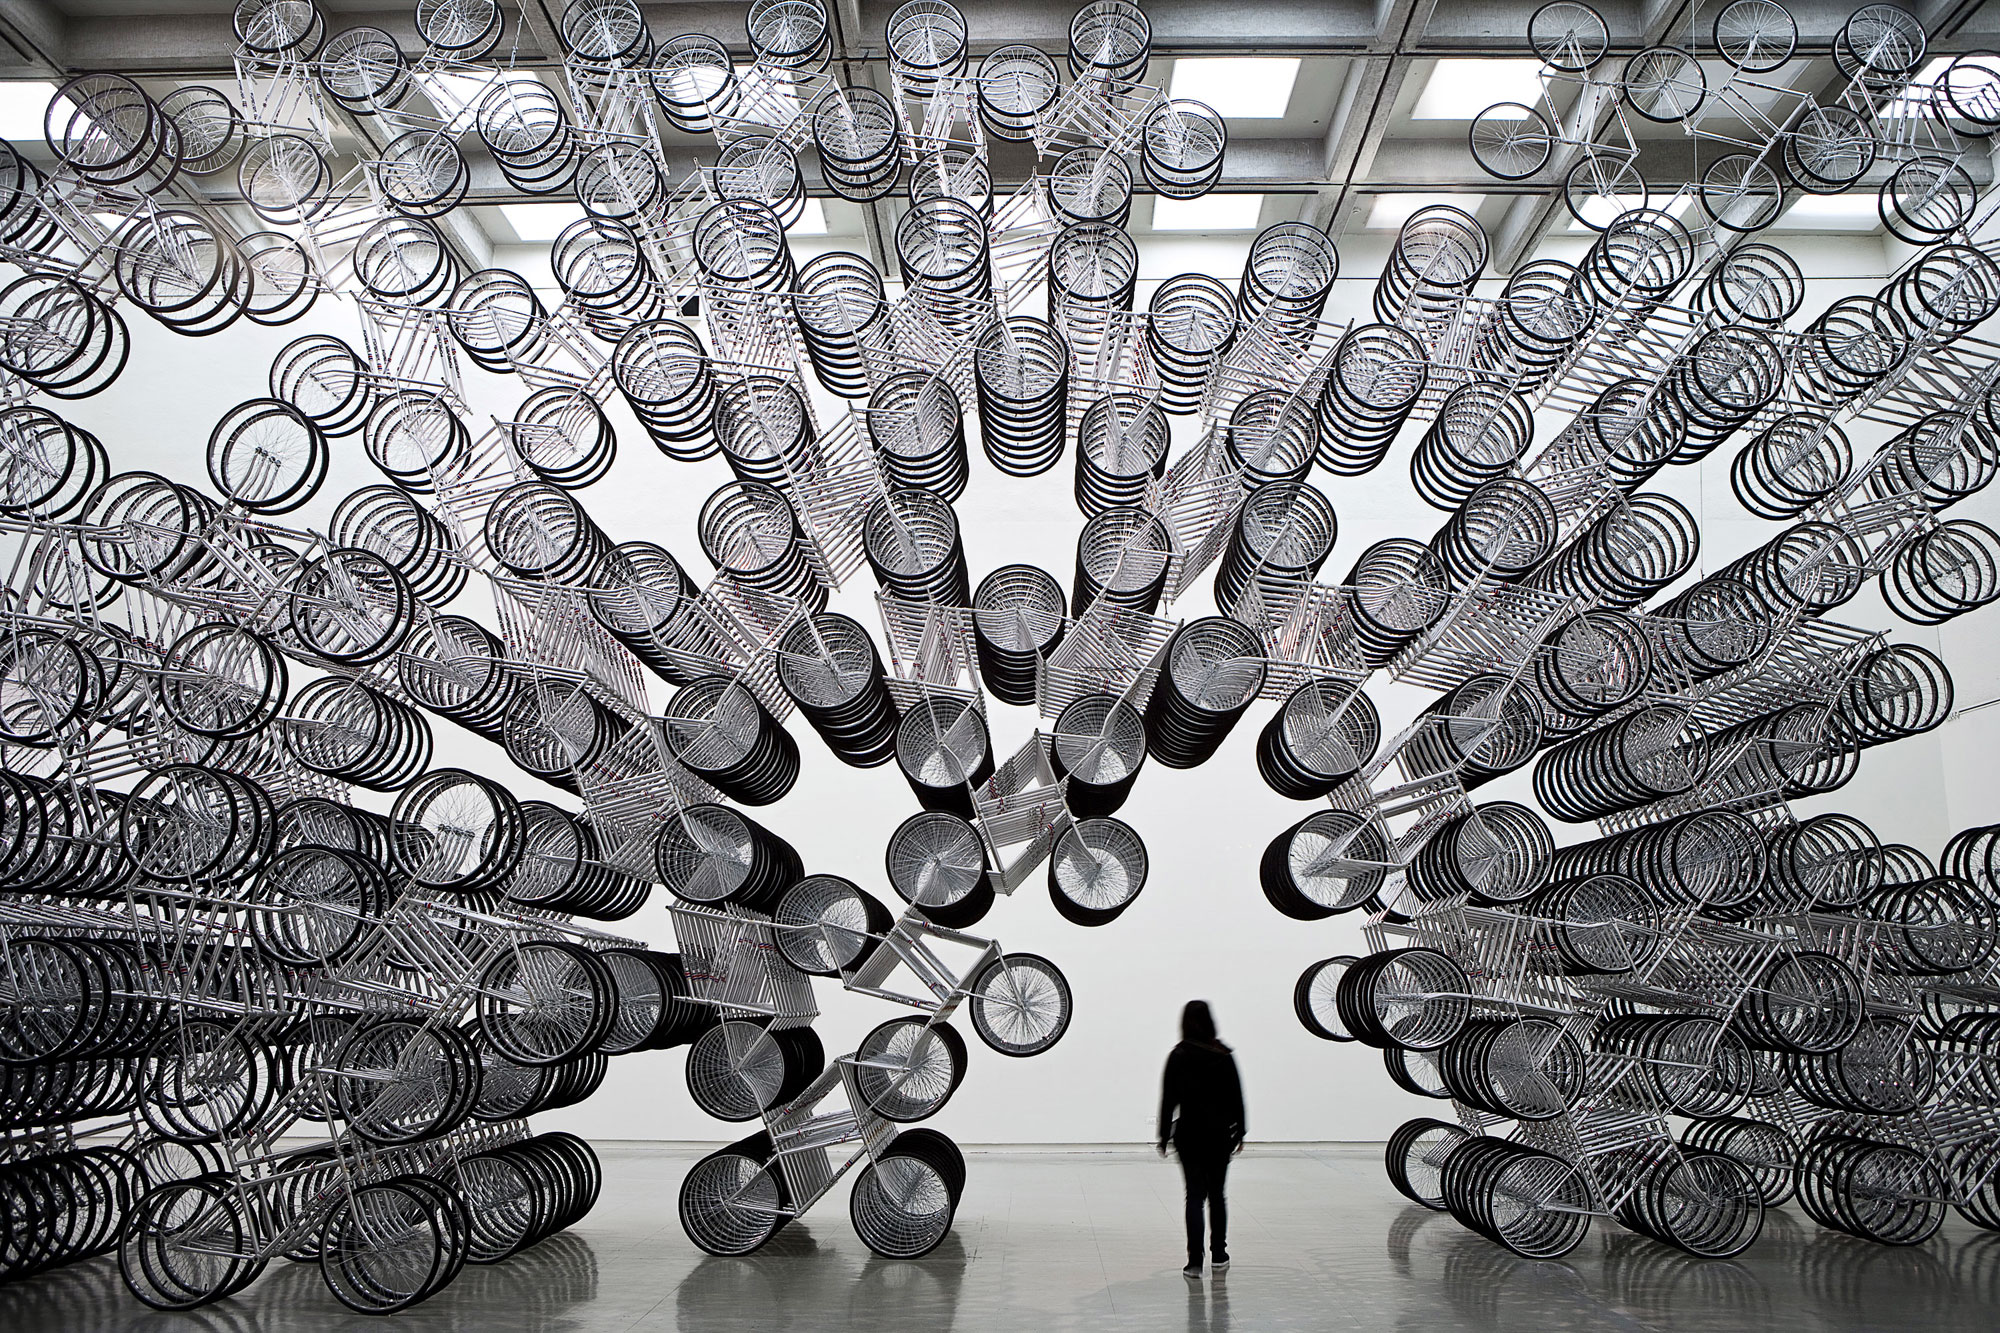 Ai Weiwei (Chinese, b. 1957) 'Forever Bicycles' 2011